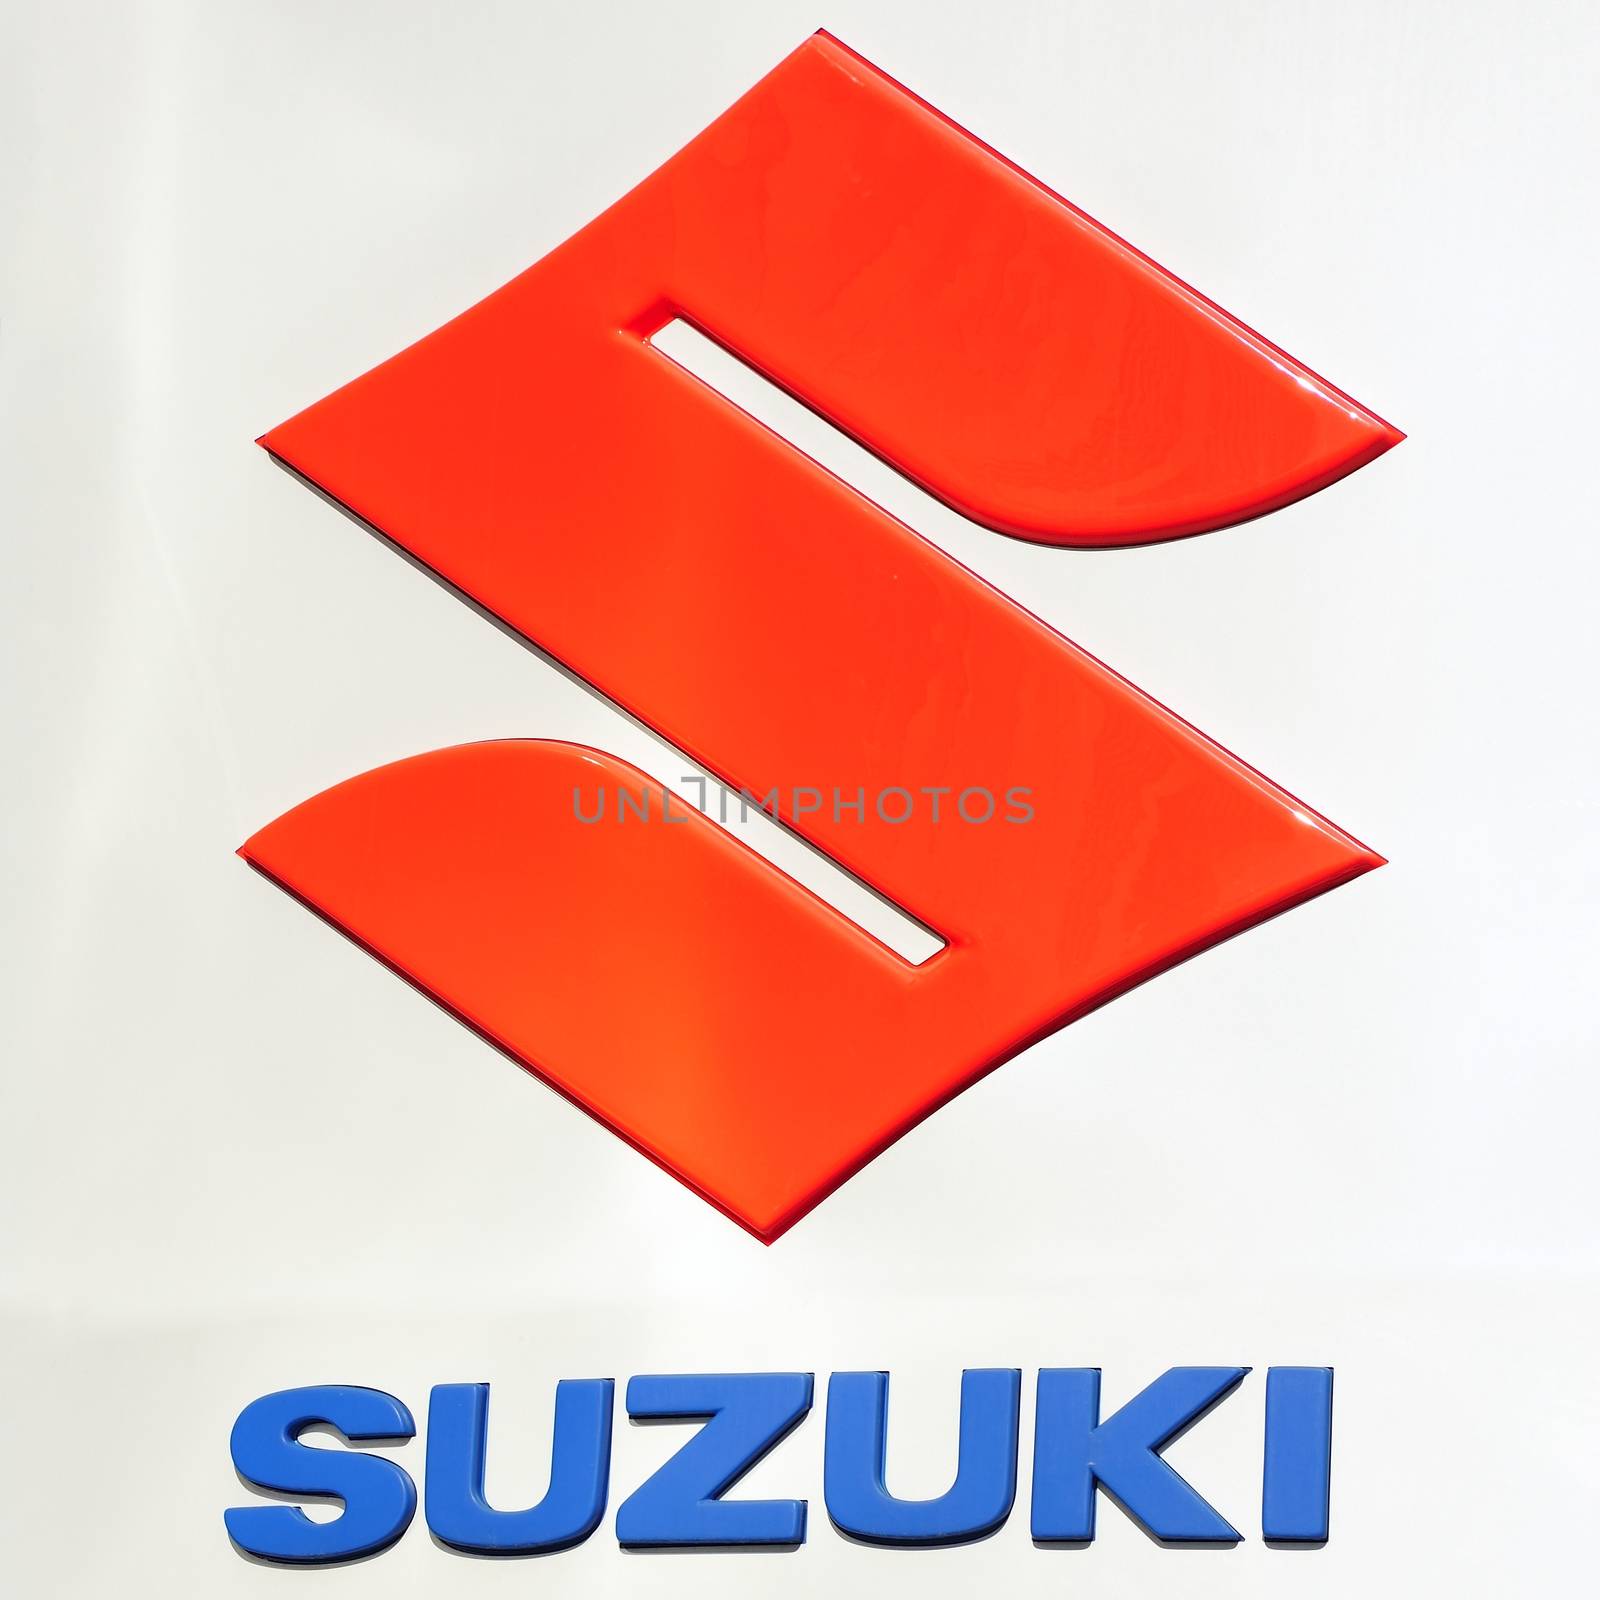 STOCKHOLM - MAY 1 2013: Suzuki logo sign on showroom premises photographed on may 1th 2013 in Stockholm, Sweden.